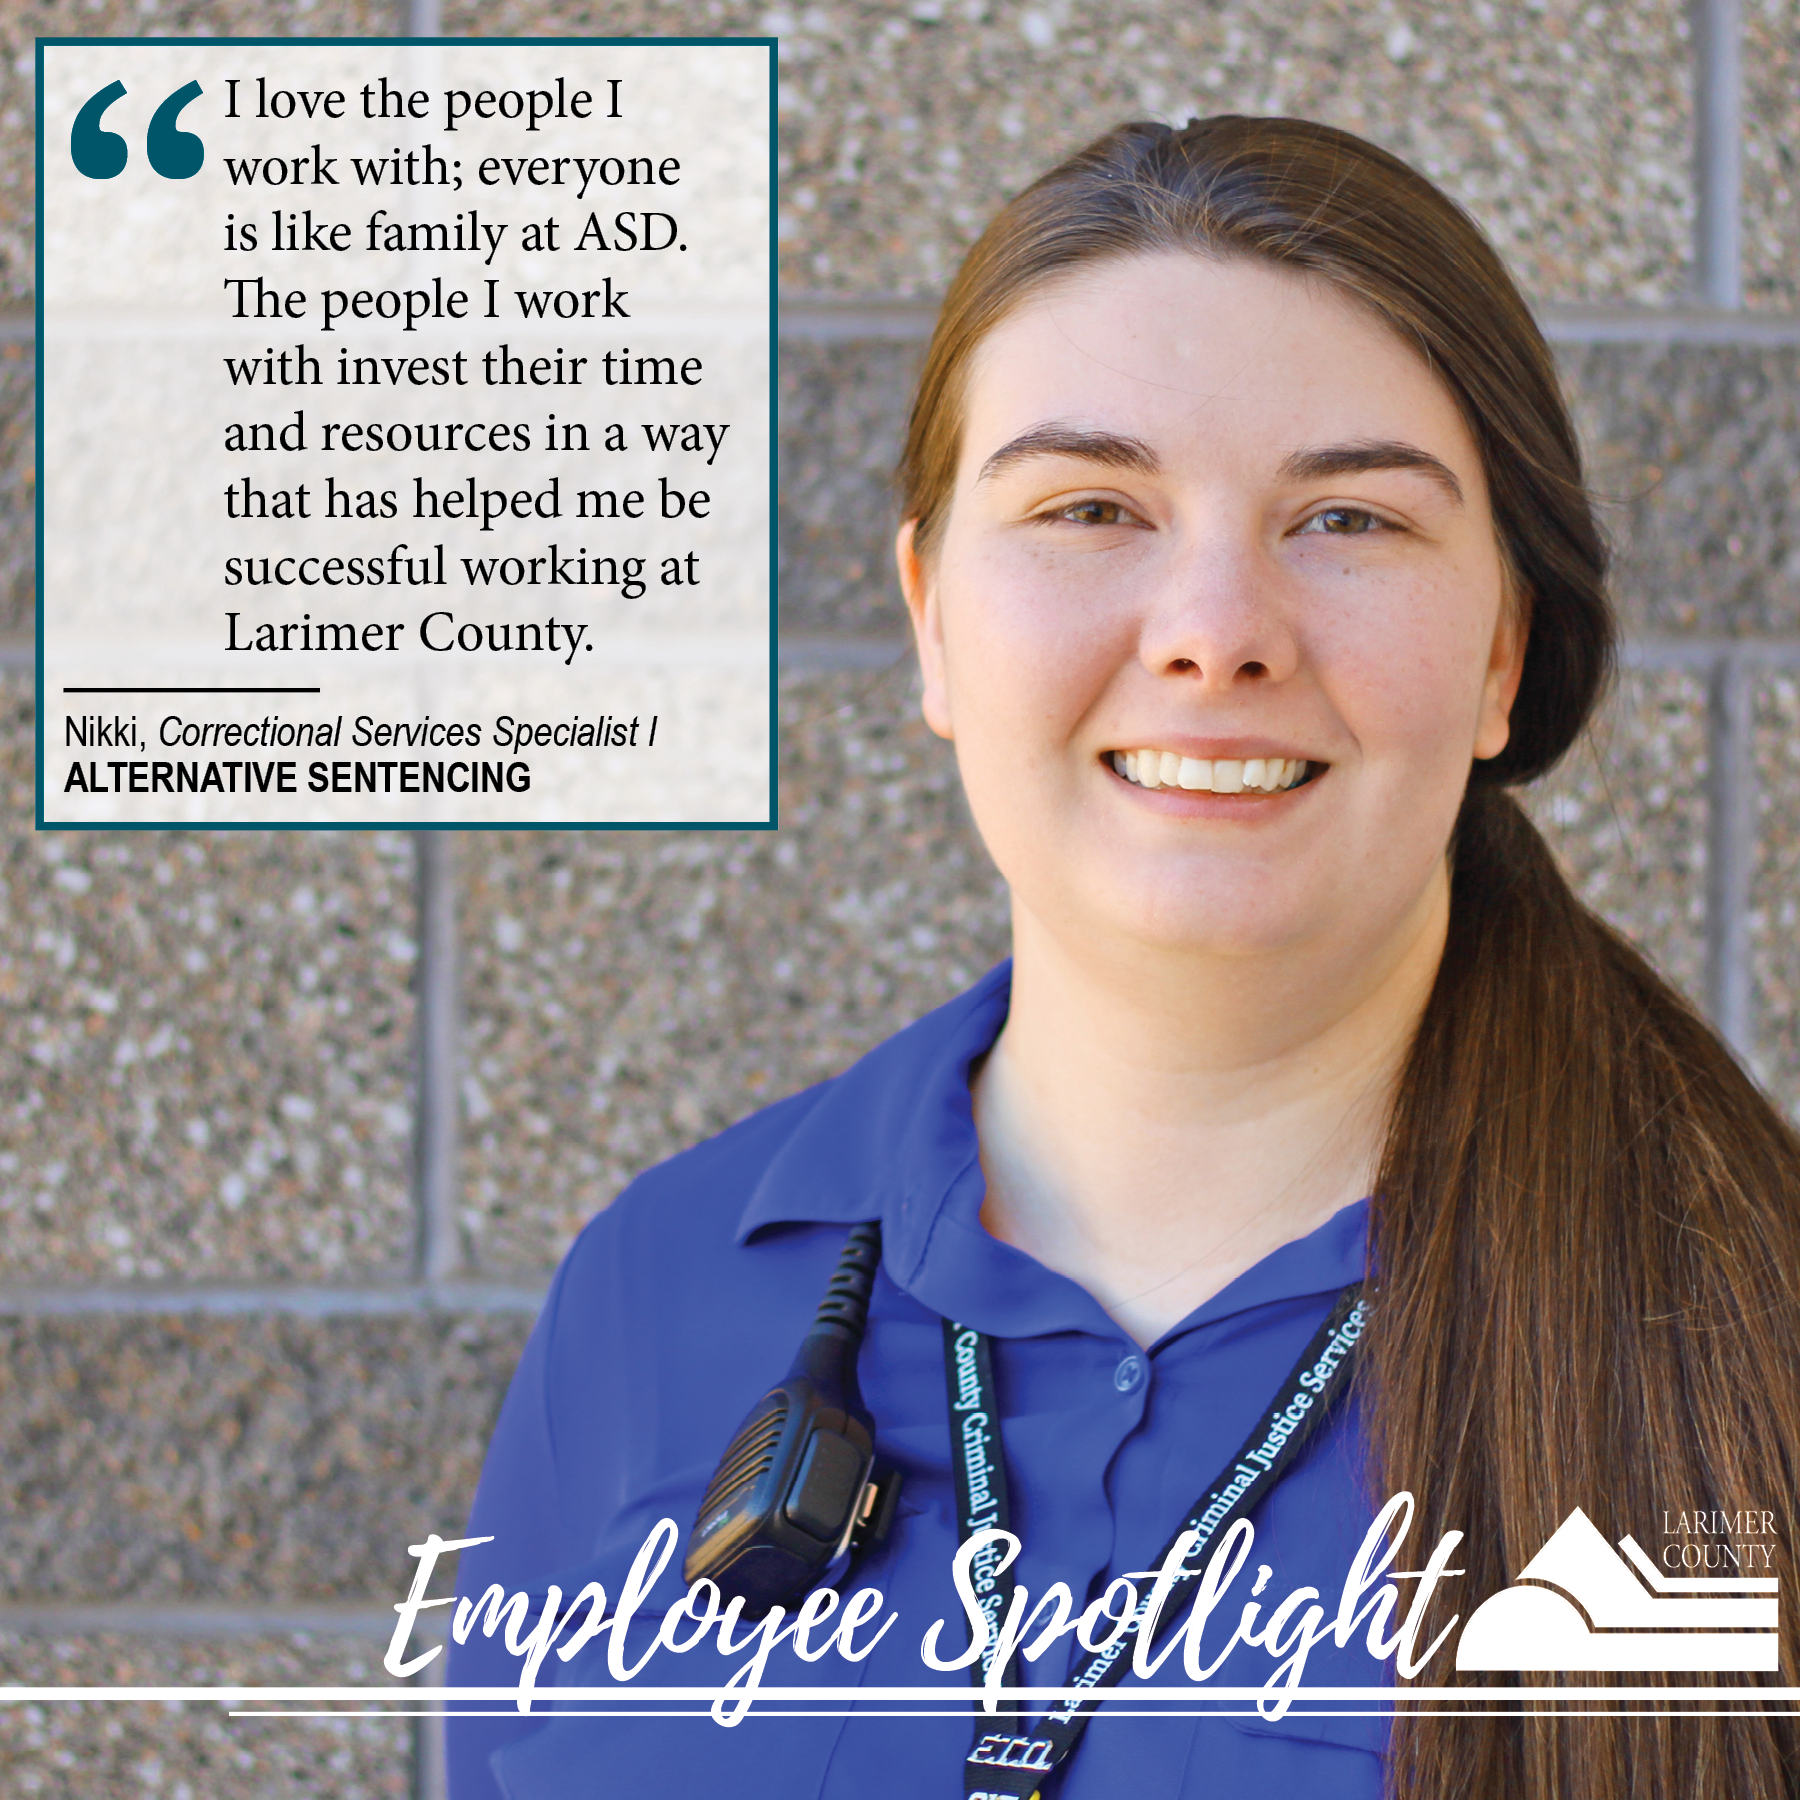 Image 1: "I love the people I work with; everyone is like family at ASD. The people I work with invest their time and resources in a way that has helped me be successful working at Larimer County."